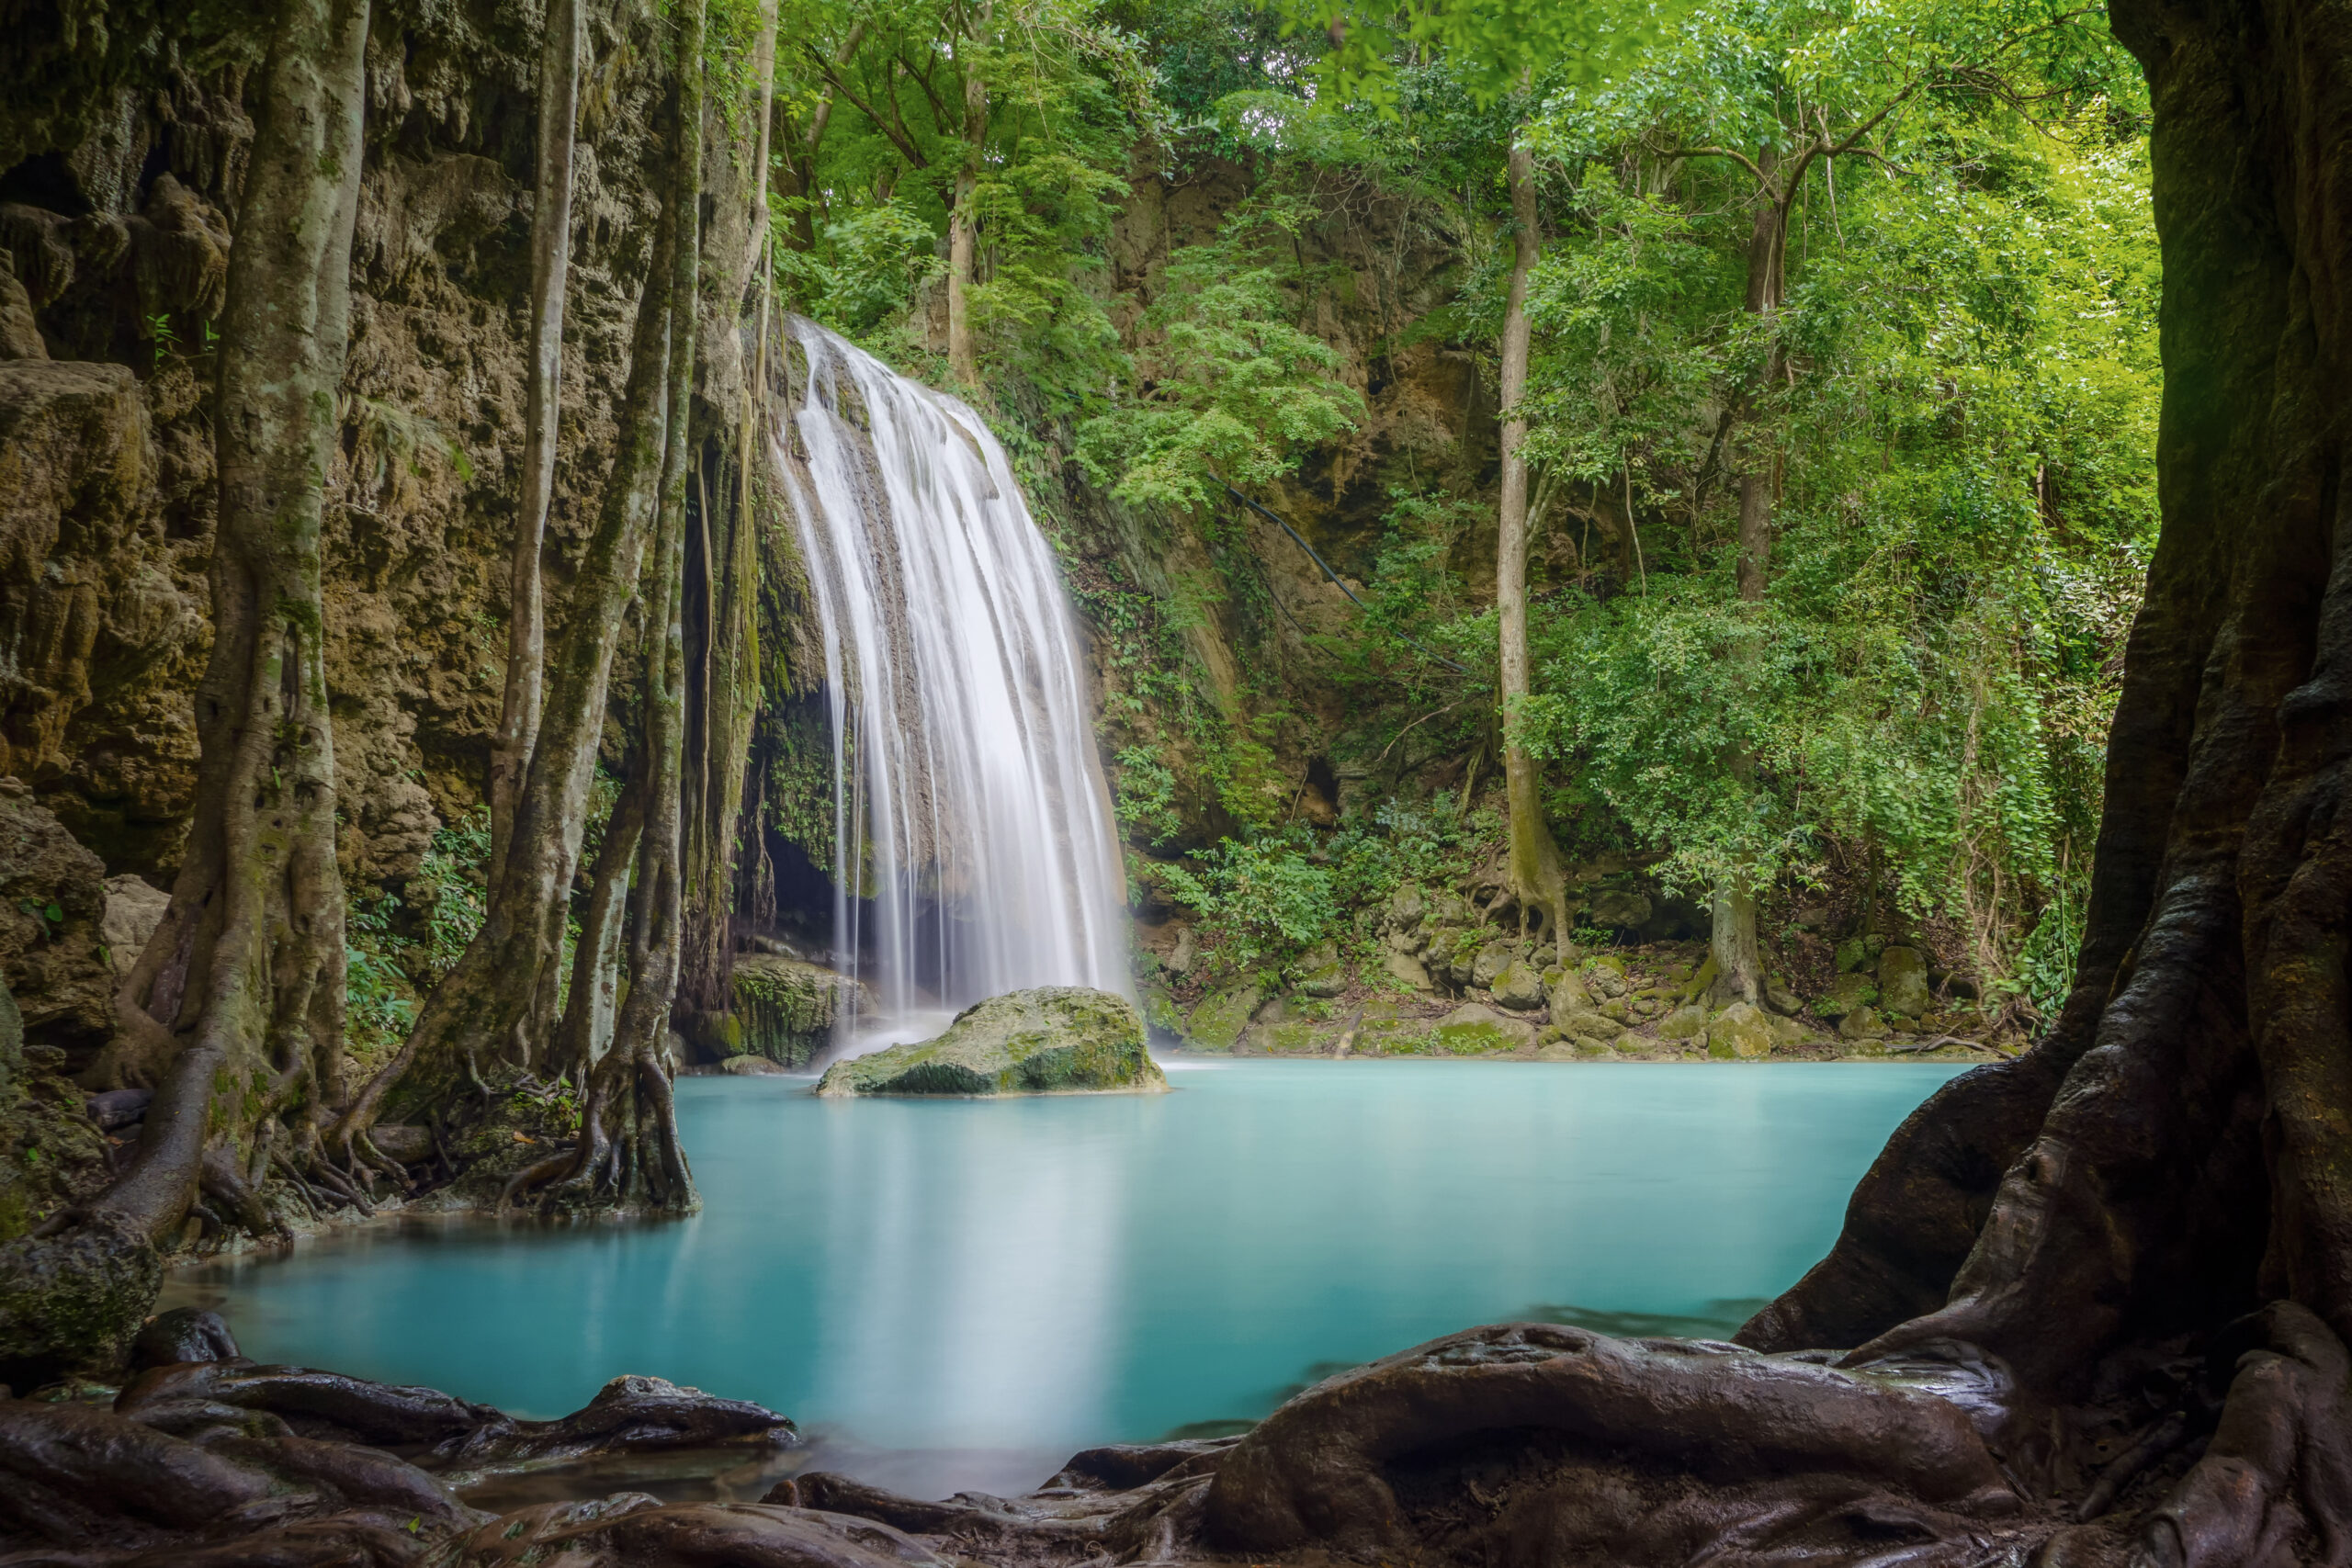 The 20 most beautiful waterfalls in Asia